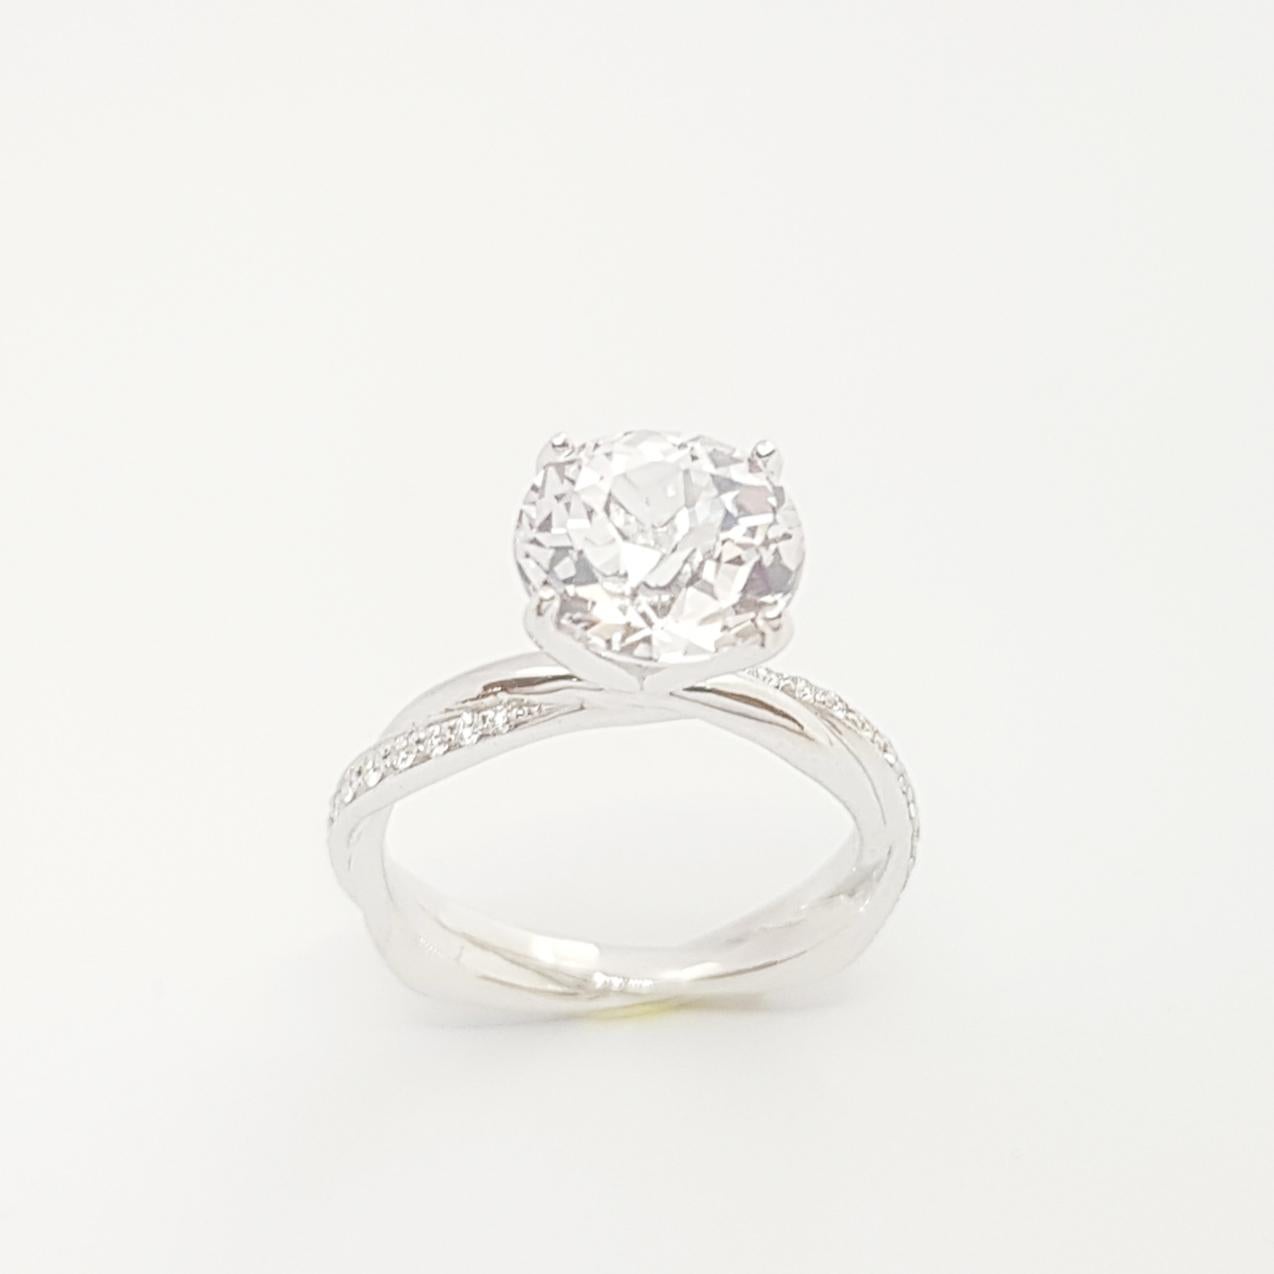 Certified Unheated 3 Carats White Sapphire with Diamond Ring in Platinum 950  For Sale 4